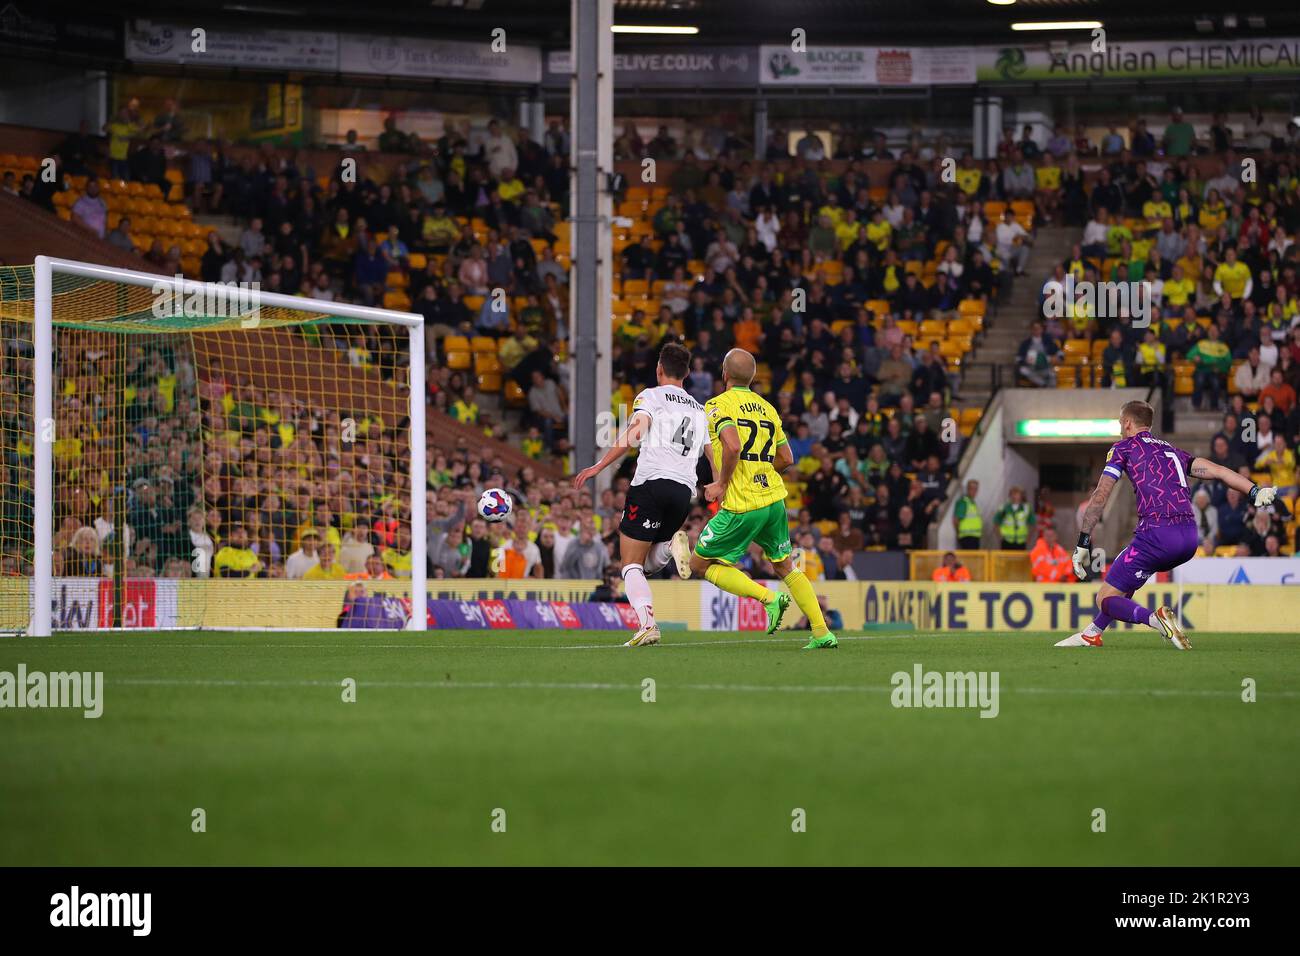 Teemu Pukki of Norwich City scores a goal to make it 1-0 - Norwich City v Bristol City, Sky Bet Championship, Carrow Road, Norwich, UK - 14th September 2022  Editorial Use Only - DataCo restrictions apply Stock Photo